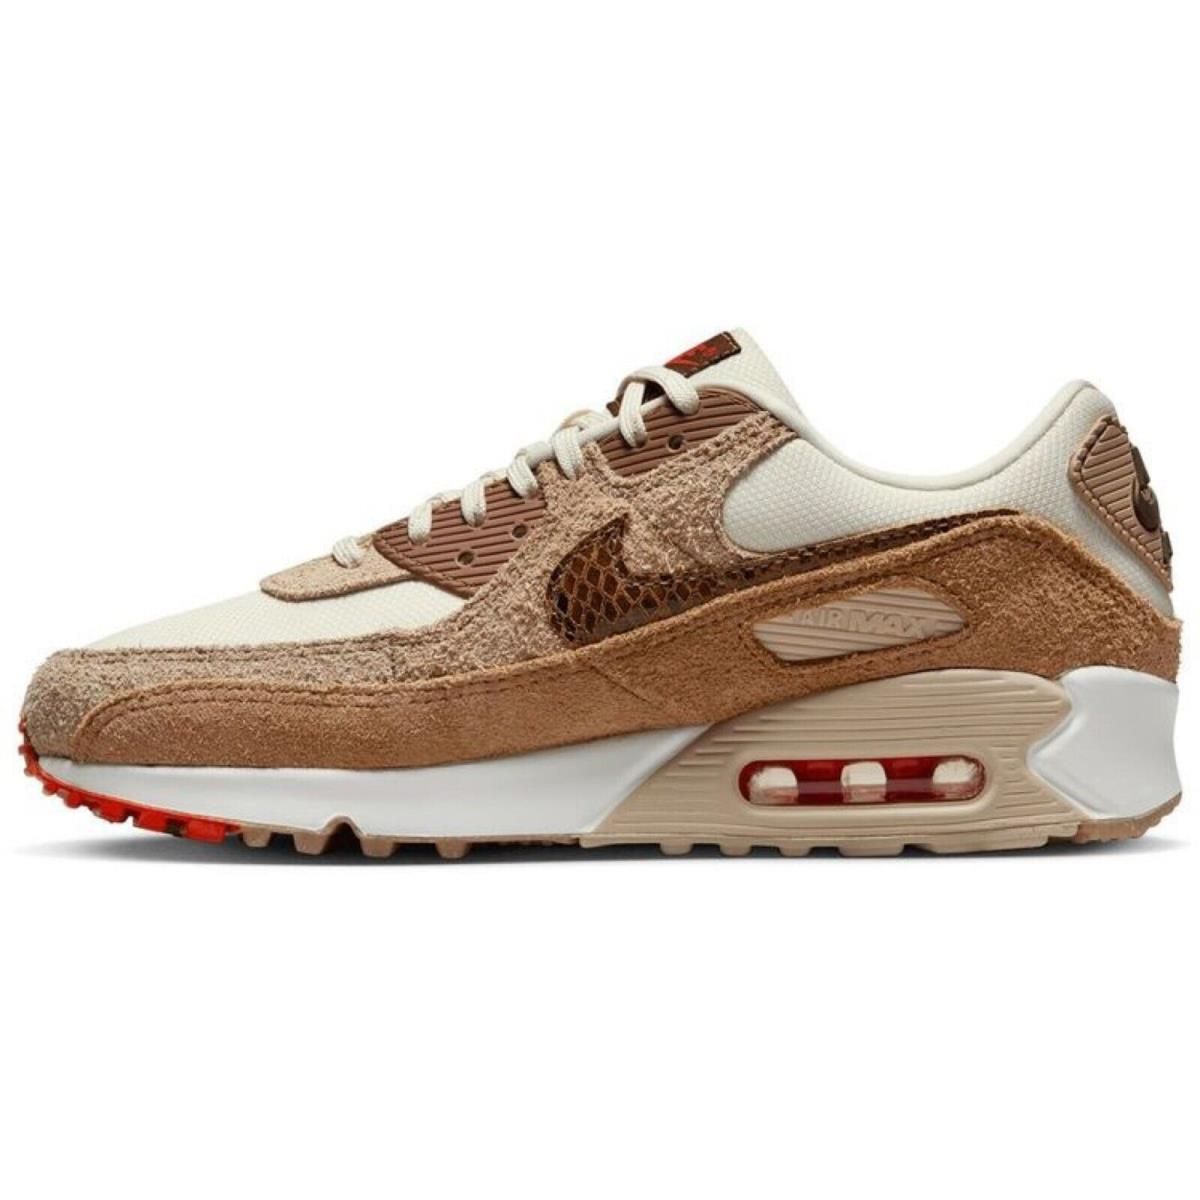 Nike shoes Air Max - Brown , White/red Manufacturer 8